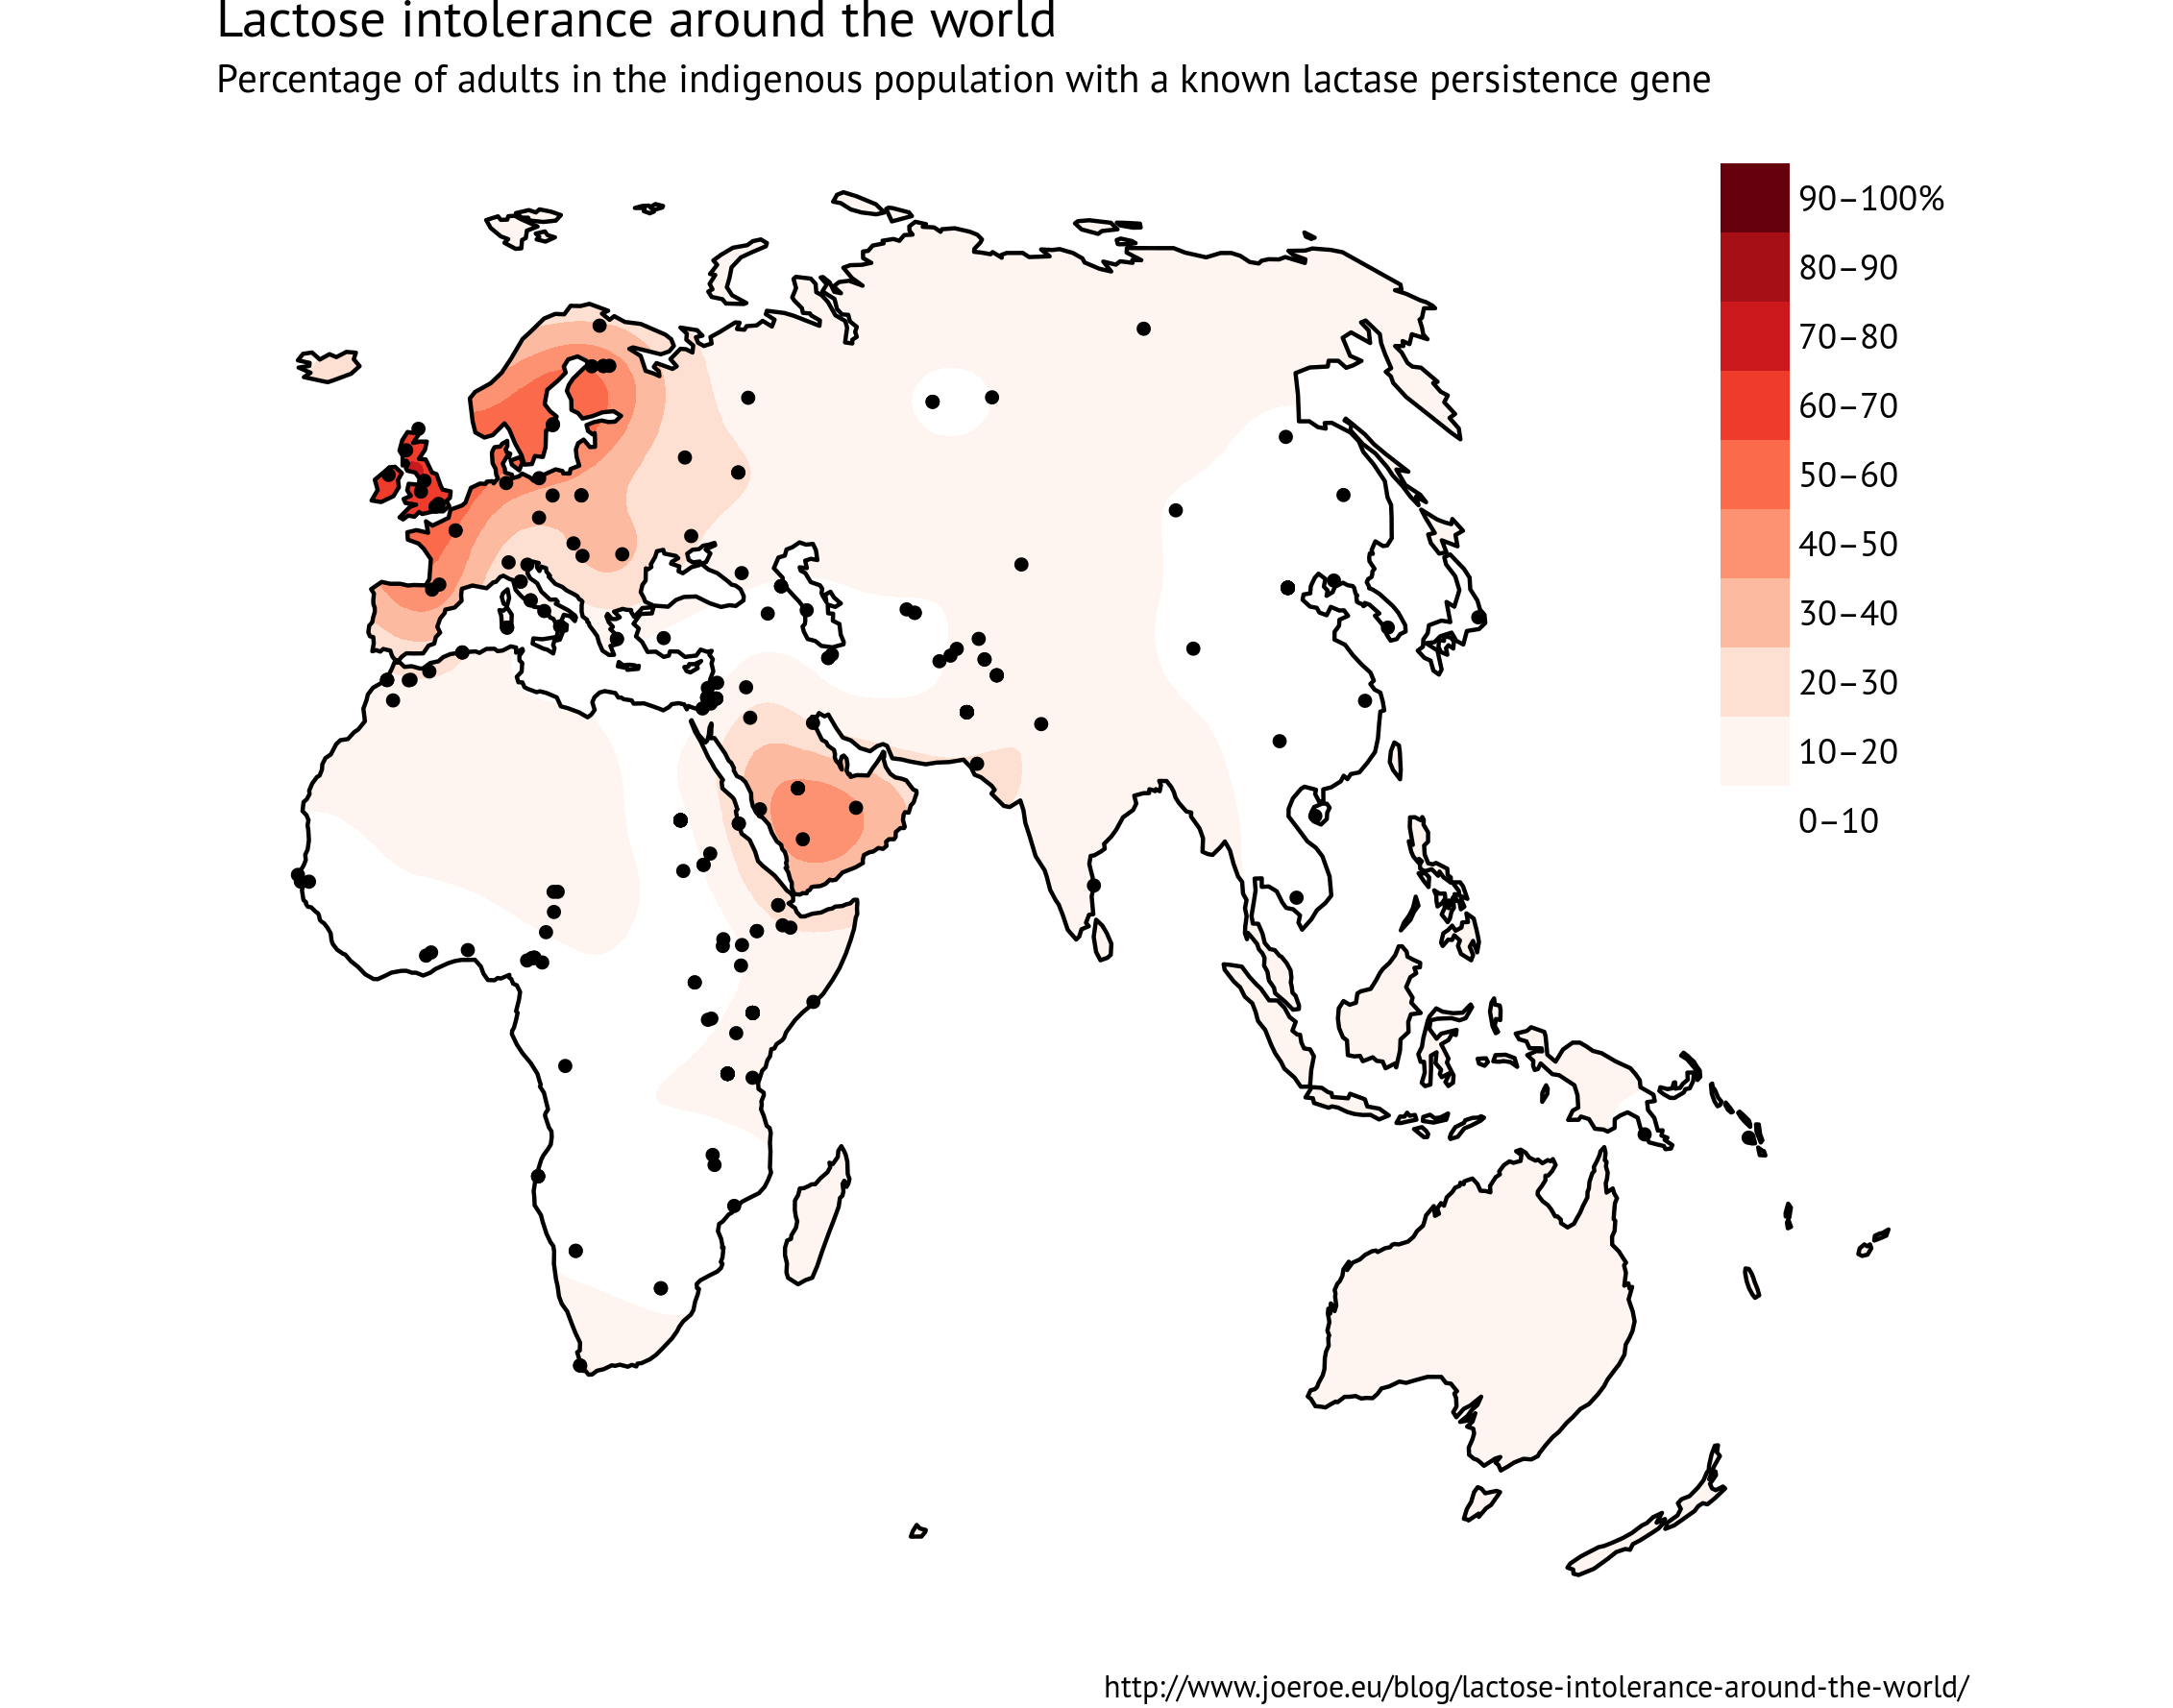 Distribution map of lactose persistent genotype